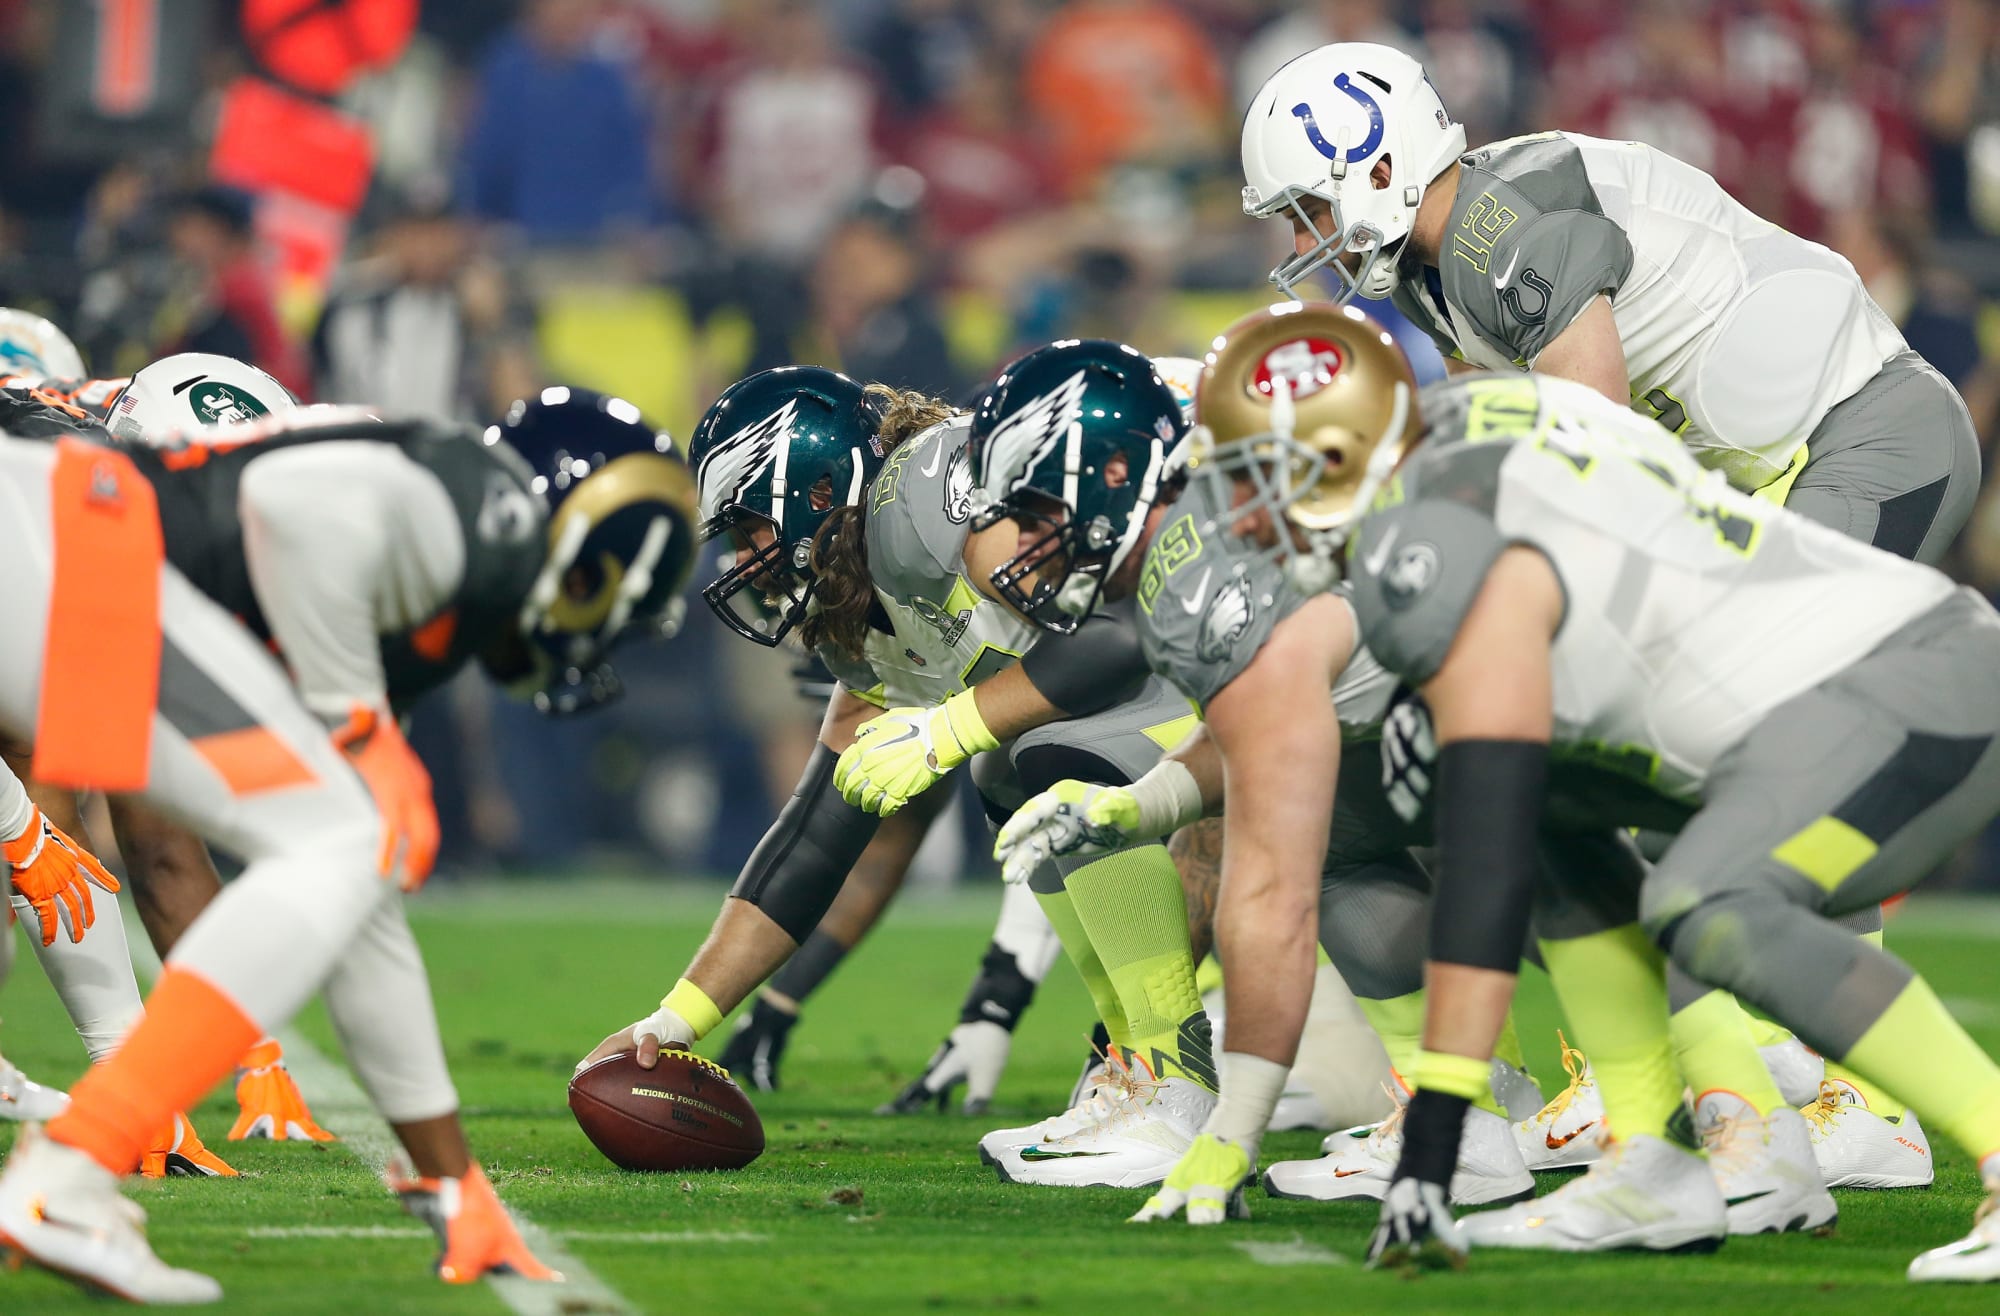 Pro Bowl What will you be watching in the 2019 NFL allstar game?